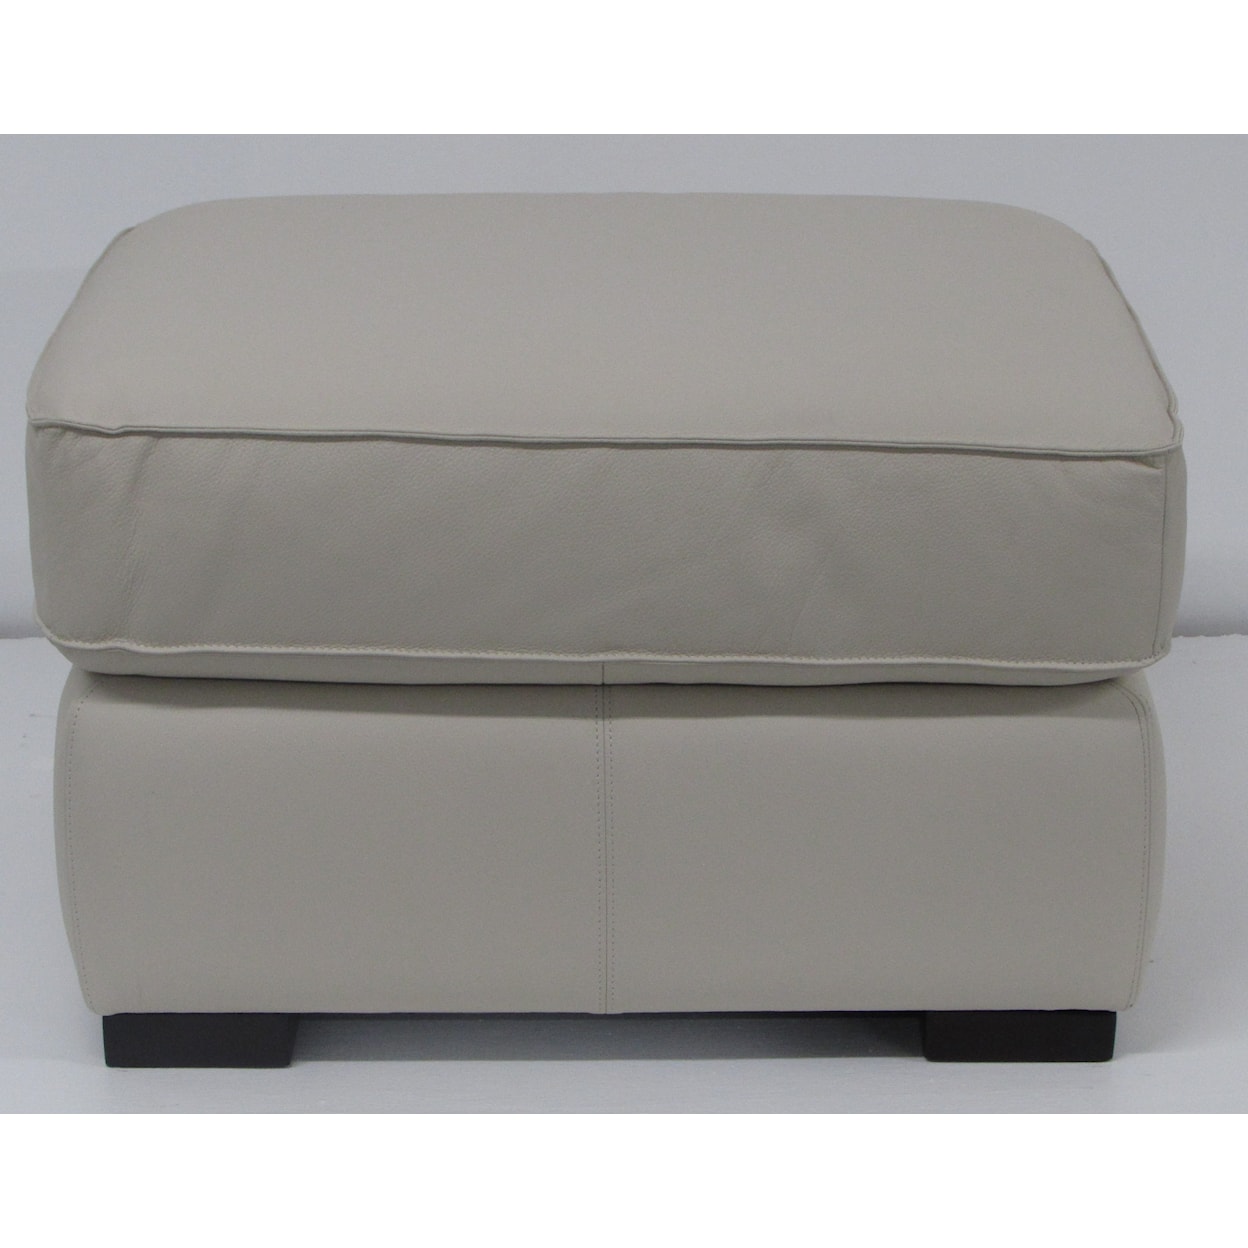 Natuzzi Editions C274 Leather Collection C274 Ivory ottoman